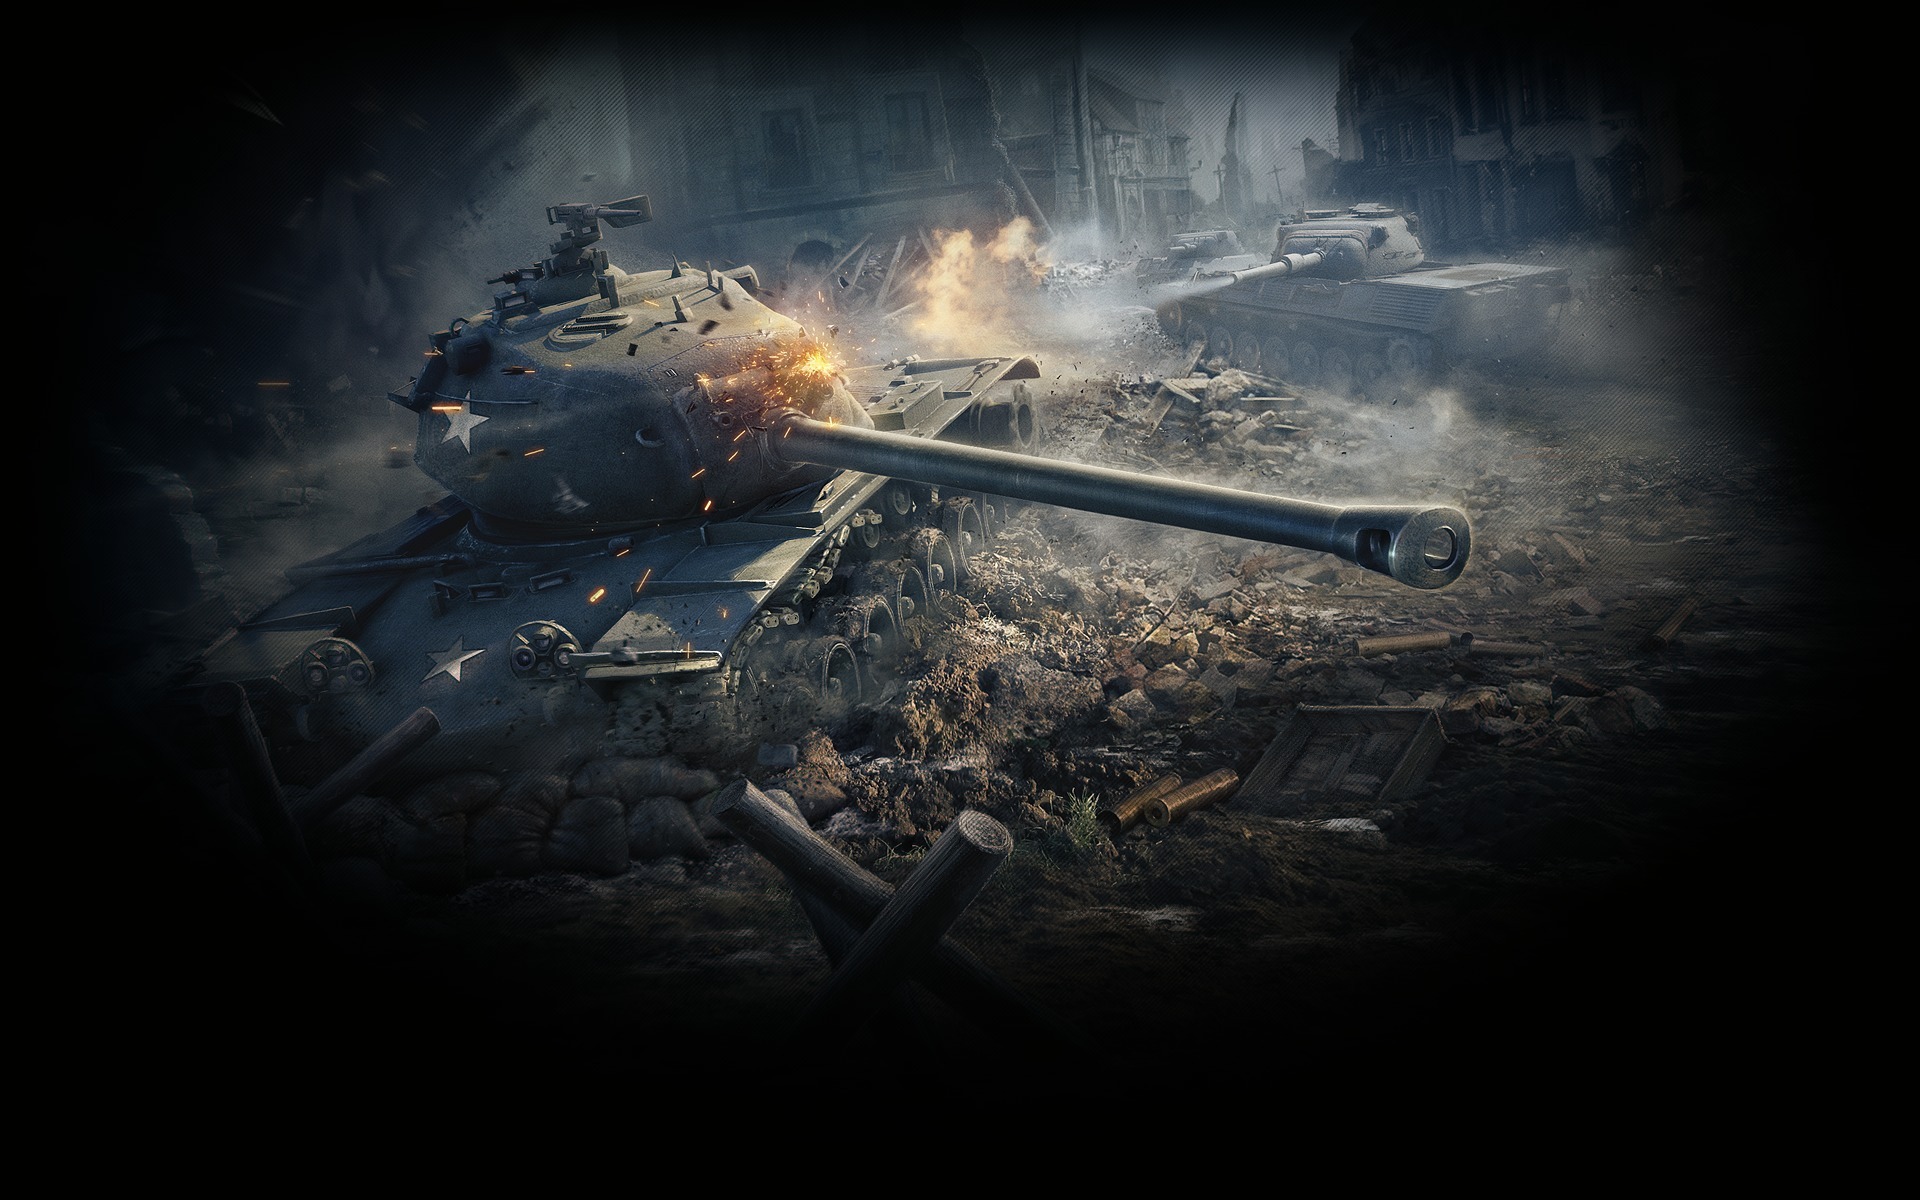 Wot from wit. М 103 World of Tanks. М103 танк мир танков. World of Tanks загрузочный экран. Фон World of Tanks.